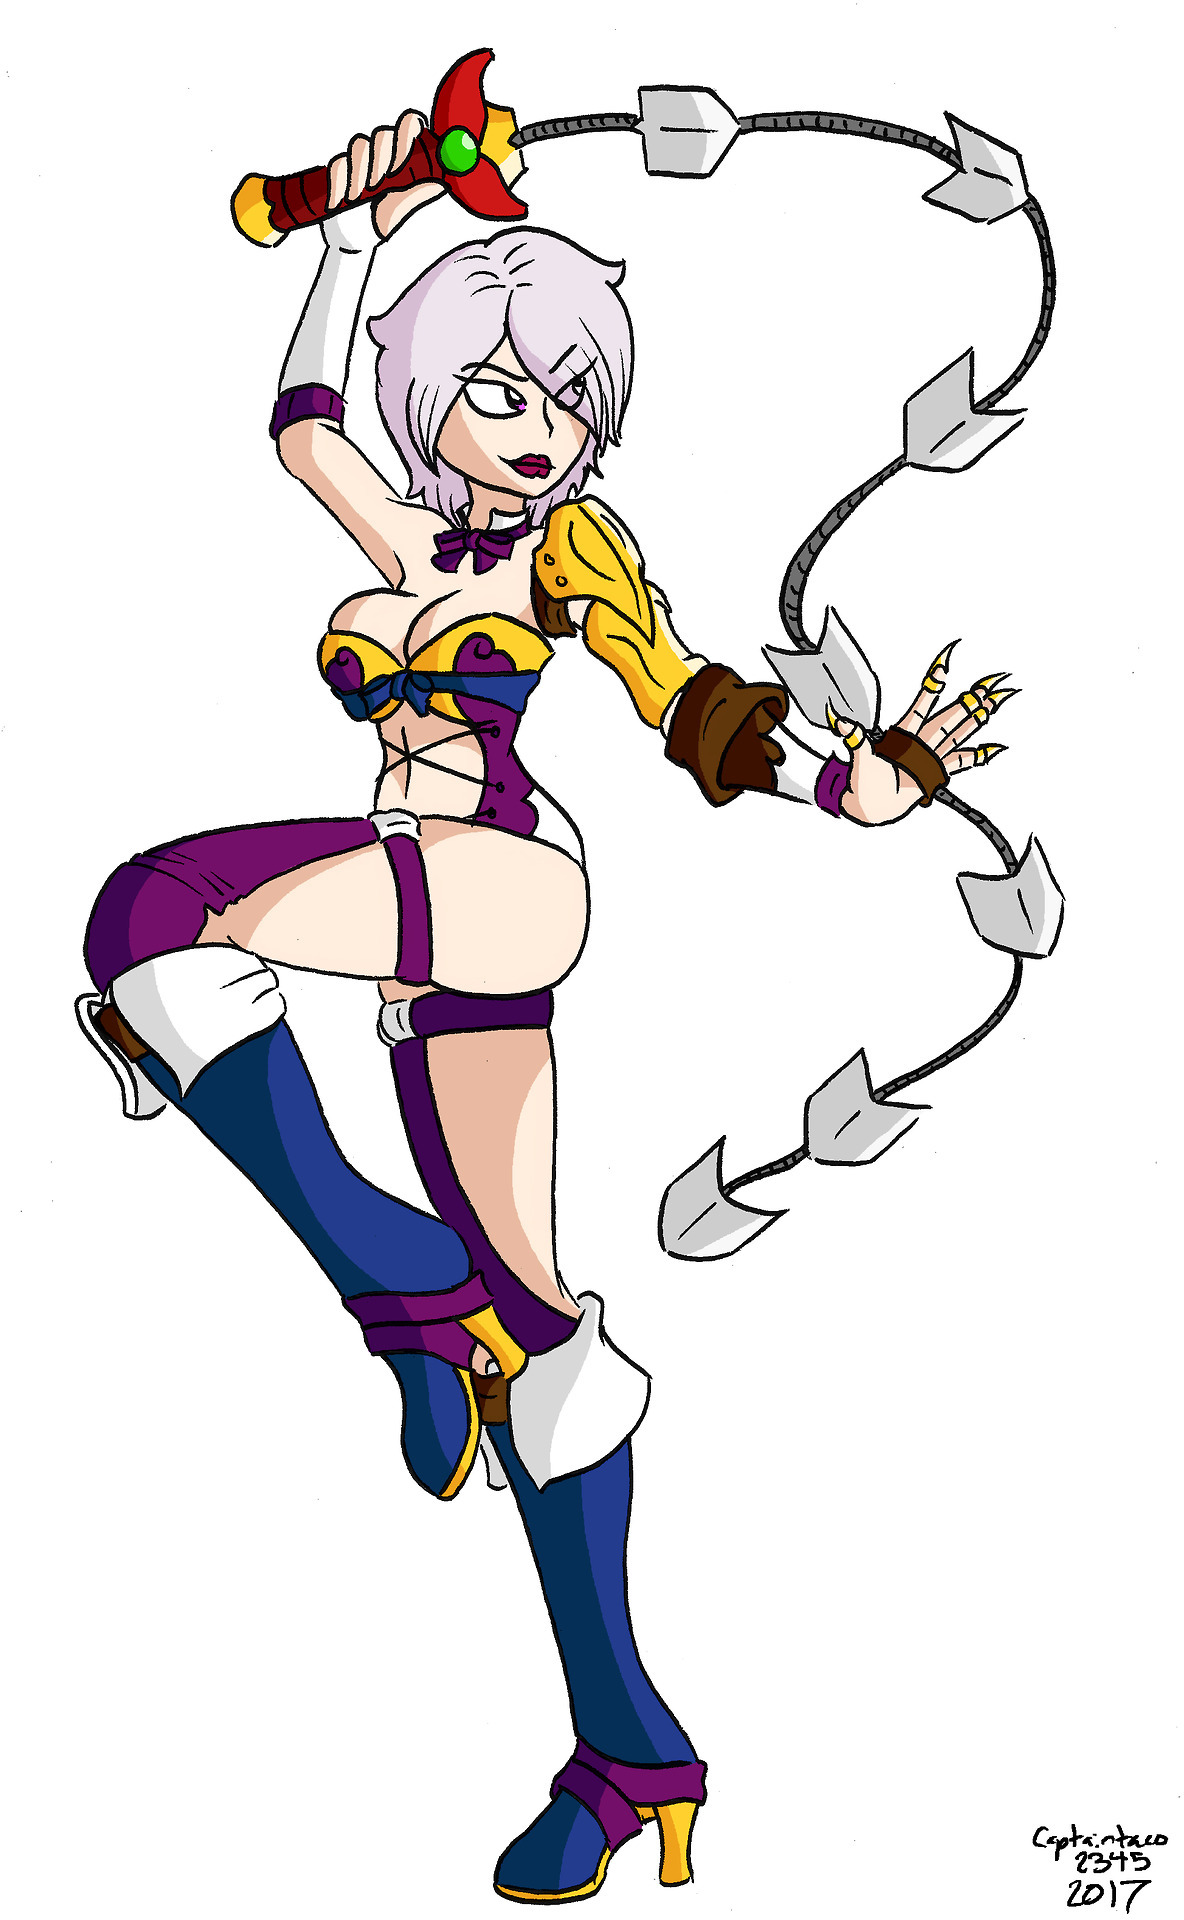 Another Soul Calibur redesign. This time I did Ivy. If Namco doesn’t say anything